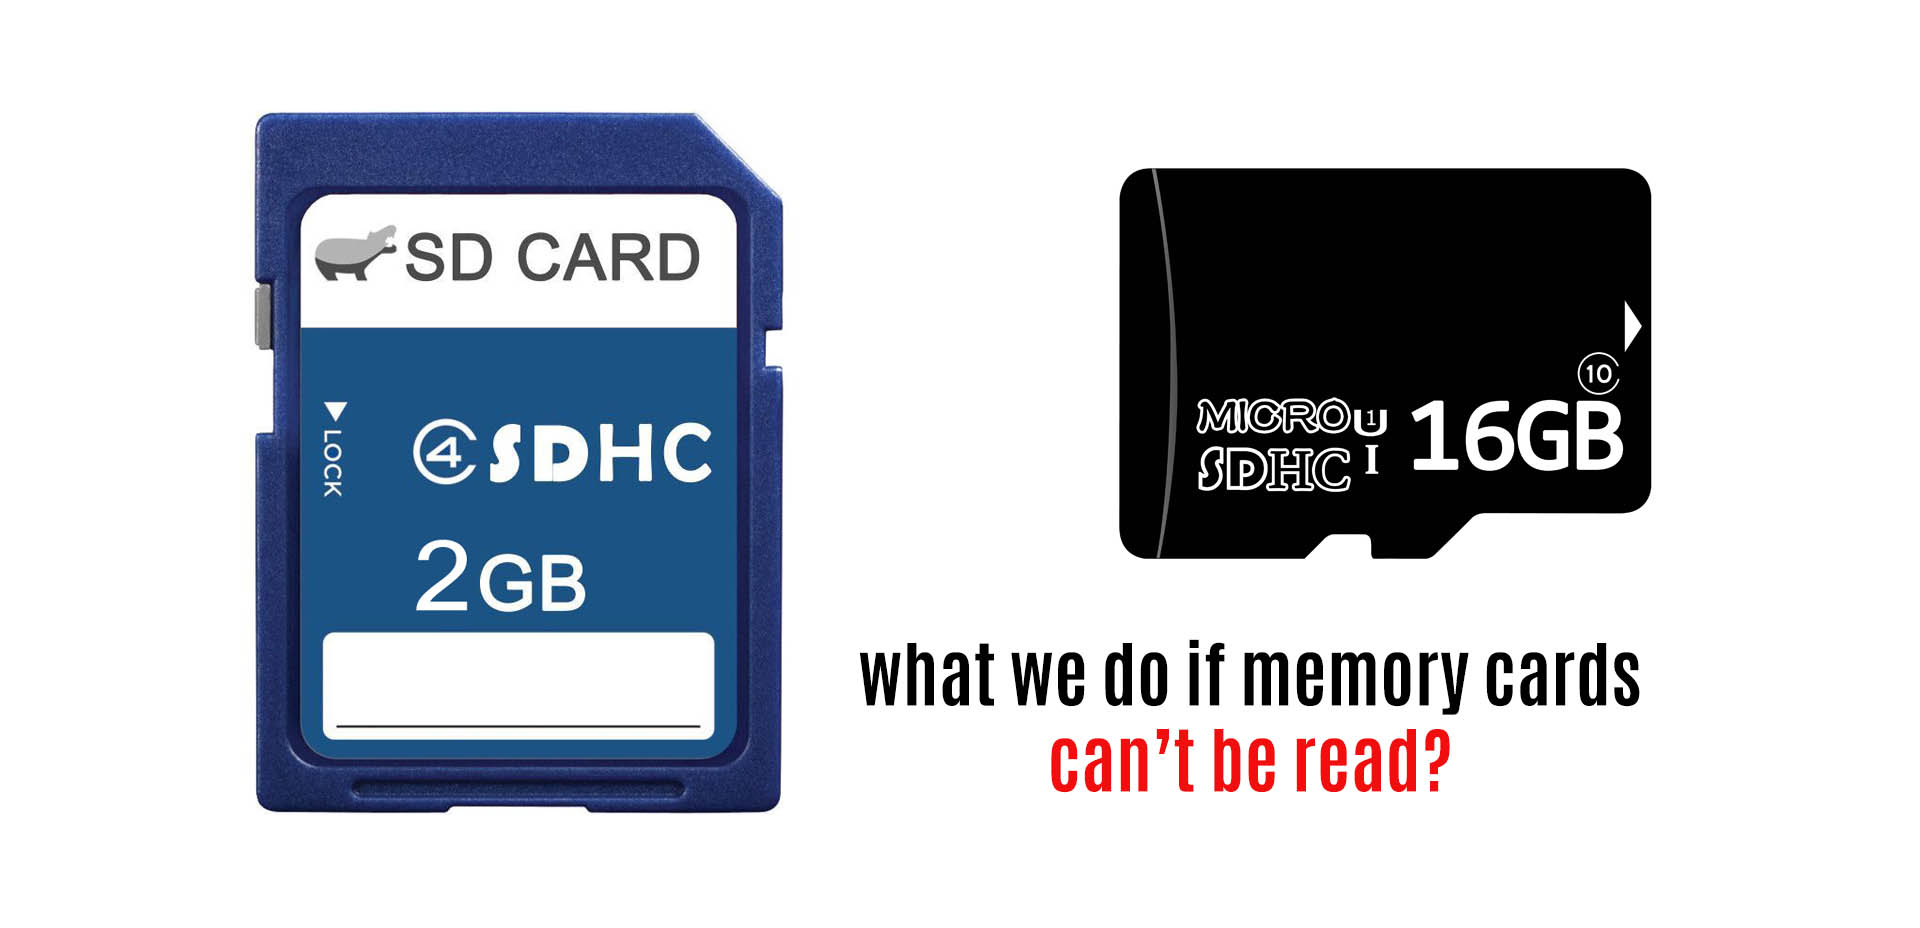  theSolutions how to fix sd cards can't read.